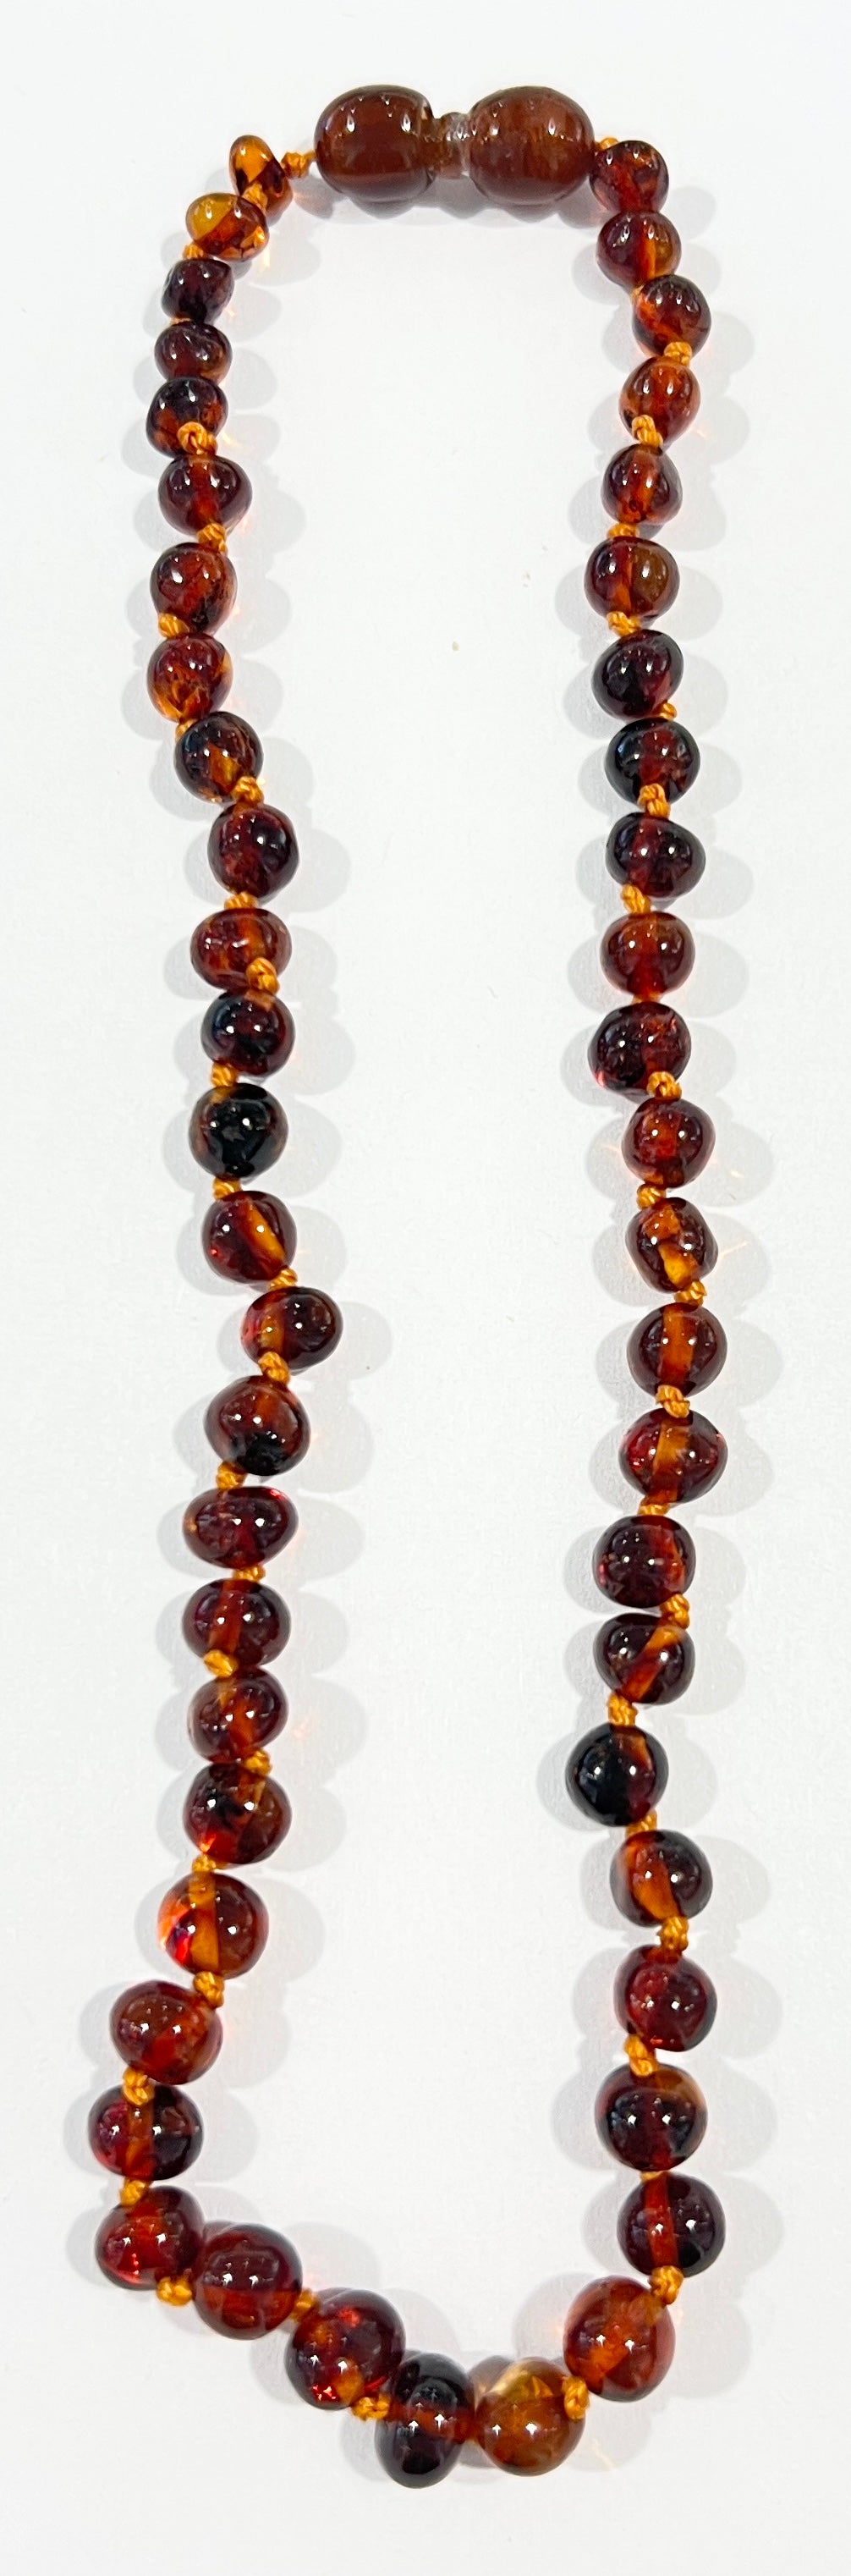 Cognac Baroque Polished Authentic Certified Amber Necklace